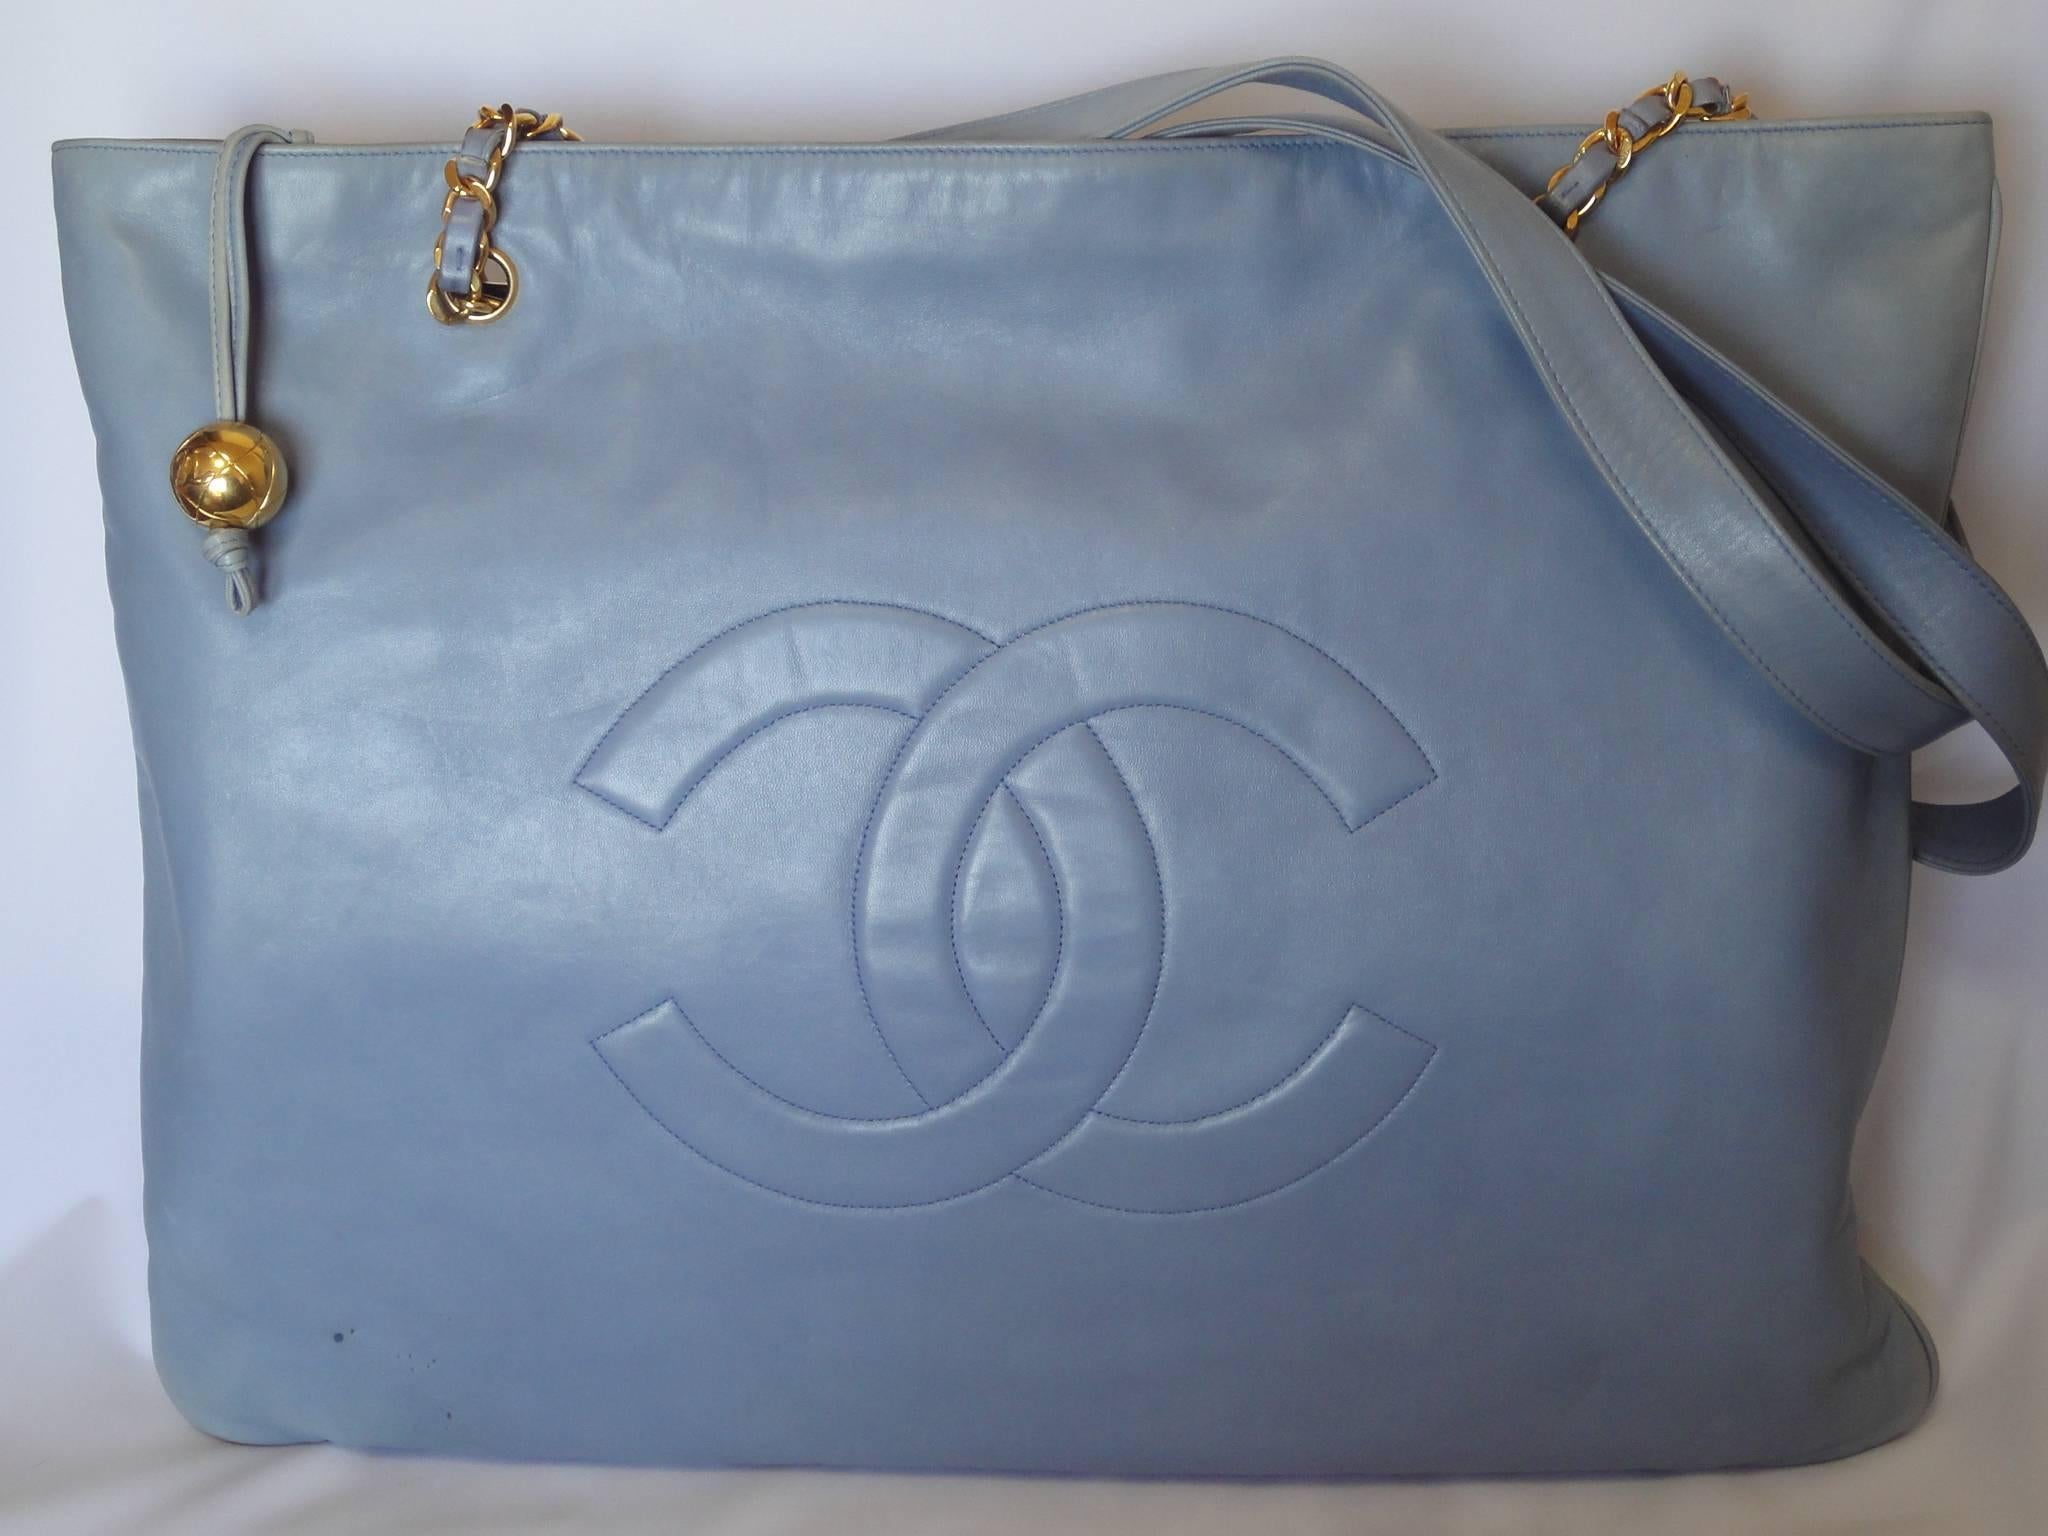 Vintage CHANEL milky blue calf leather extra large chain shoulder tote bag with gold tone CC ball motif. Rare color purse. Limited edition.

Introducing another vintage CHANEL milky blue calfskin extra large tote bag with gold tone chain handles and